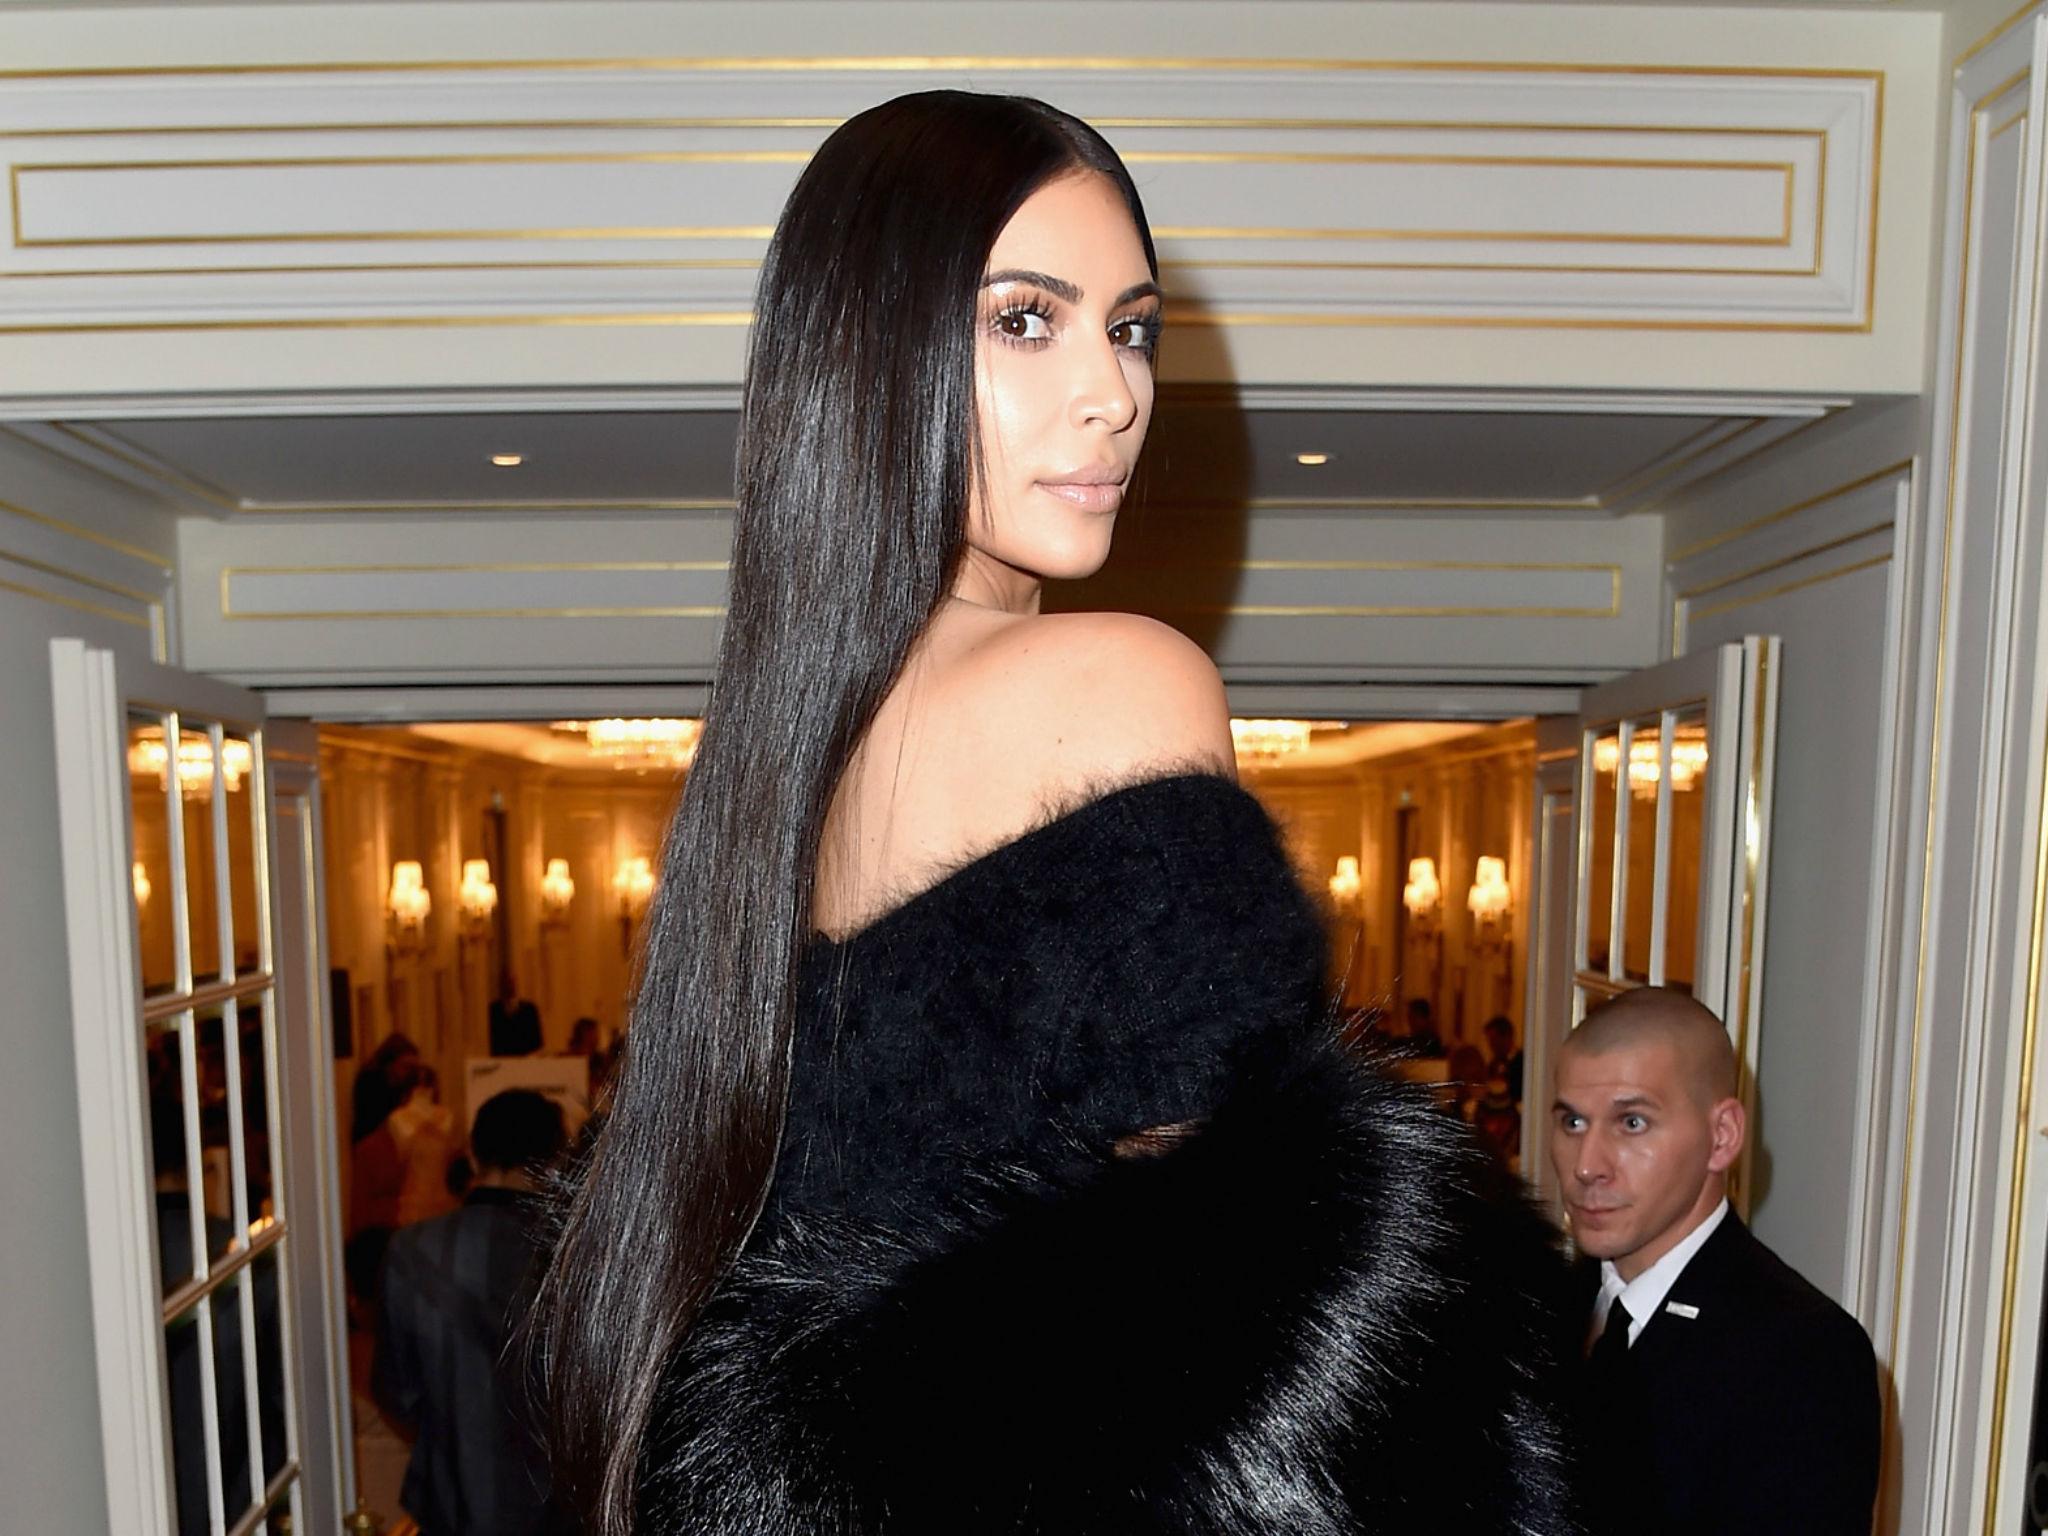 Kim Kardashian Returns to Paris for the First Time Since Her Robbery in 2016